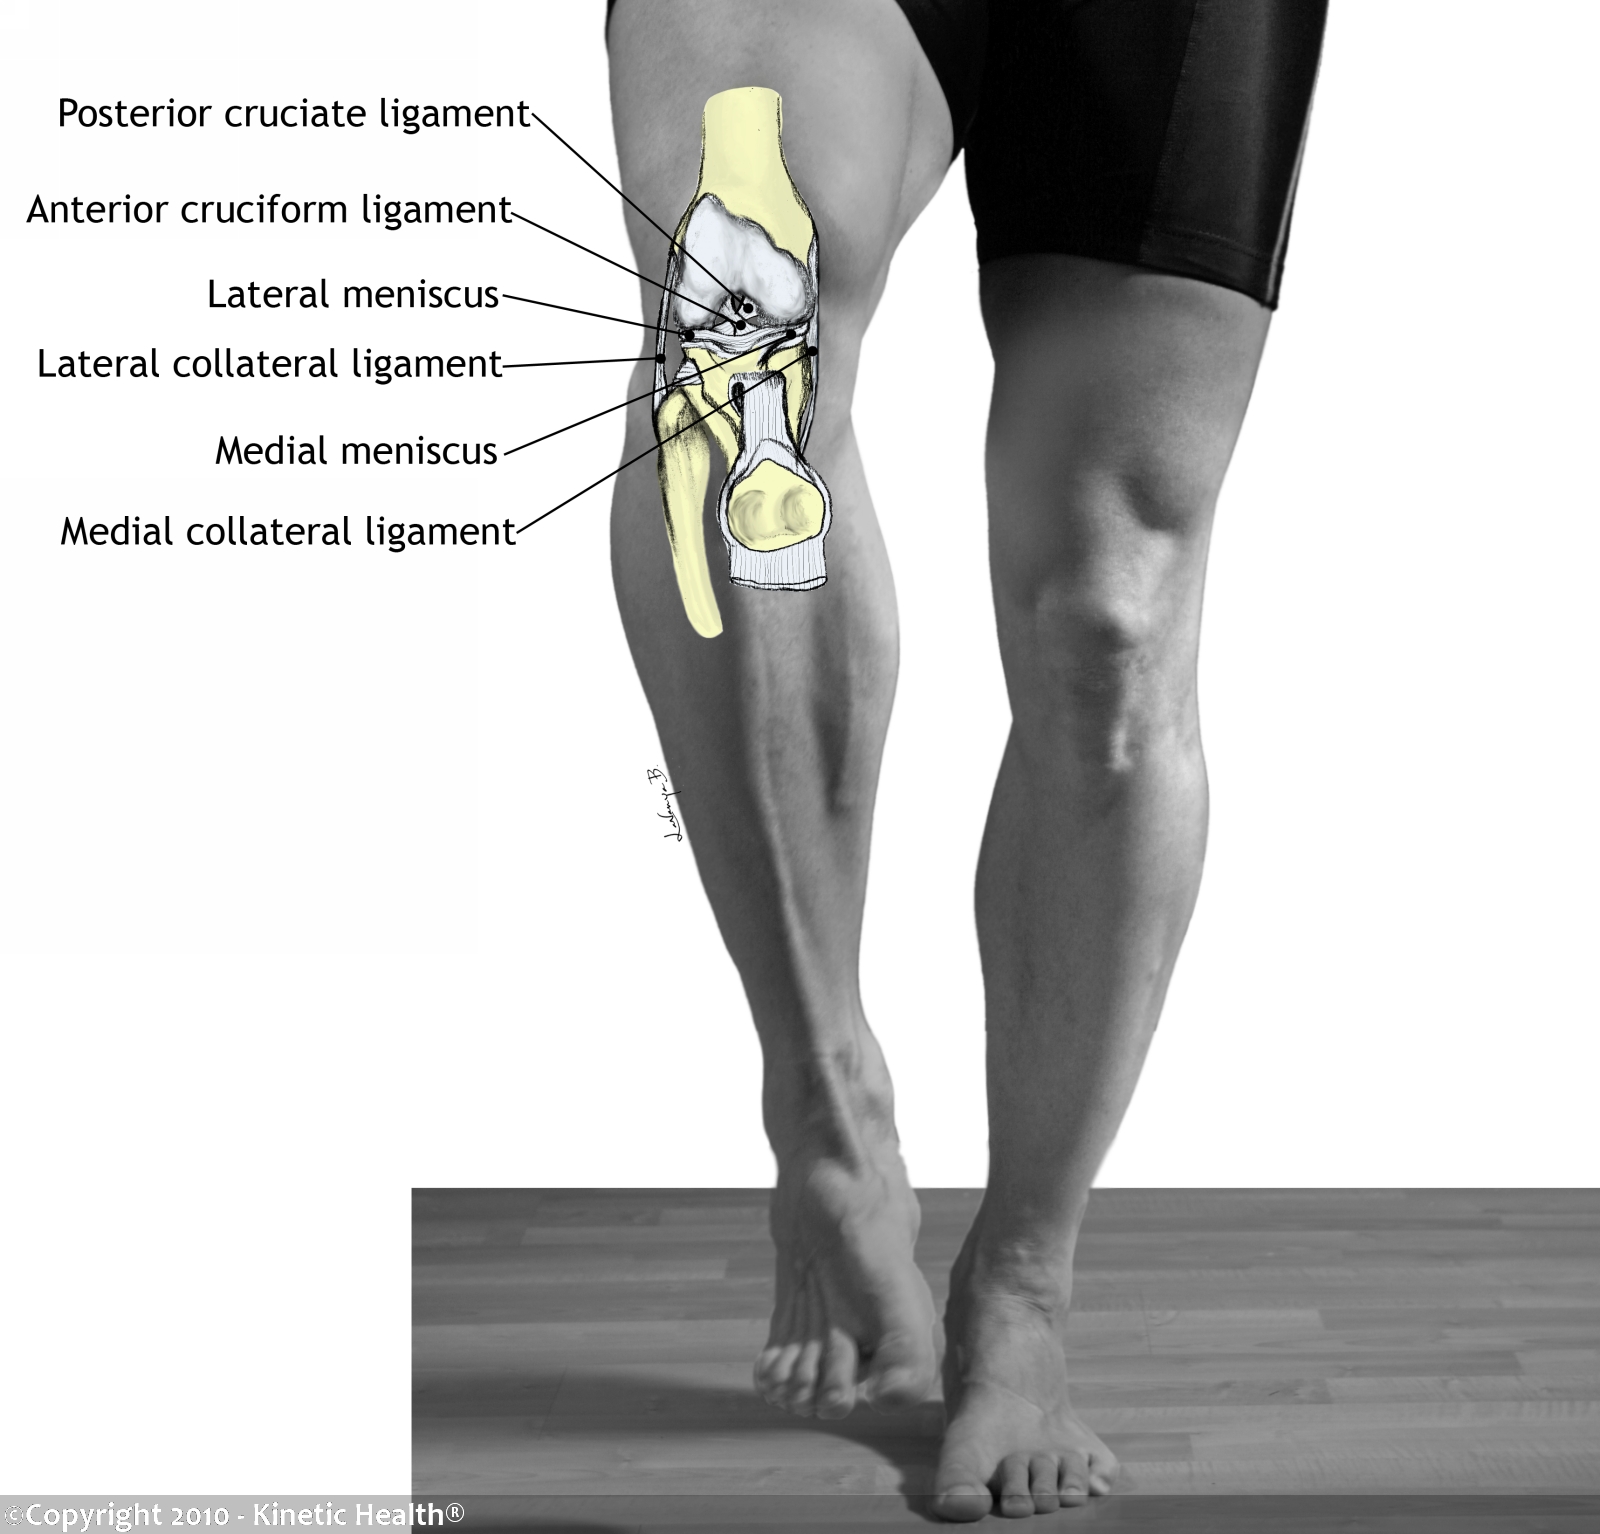 Kinetic Health - Calgary: Ligament Injuries of the Knee